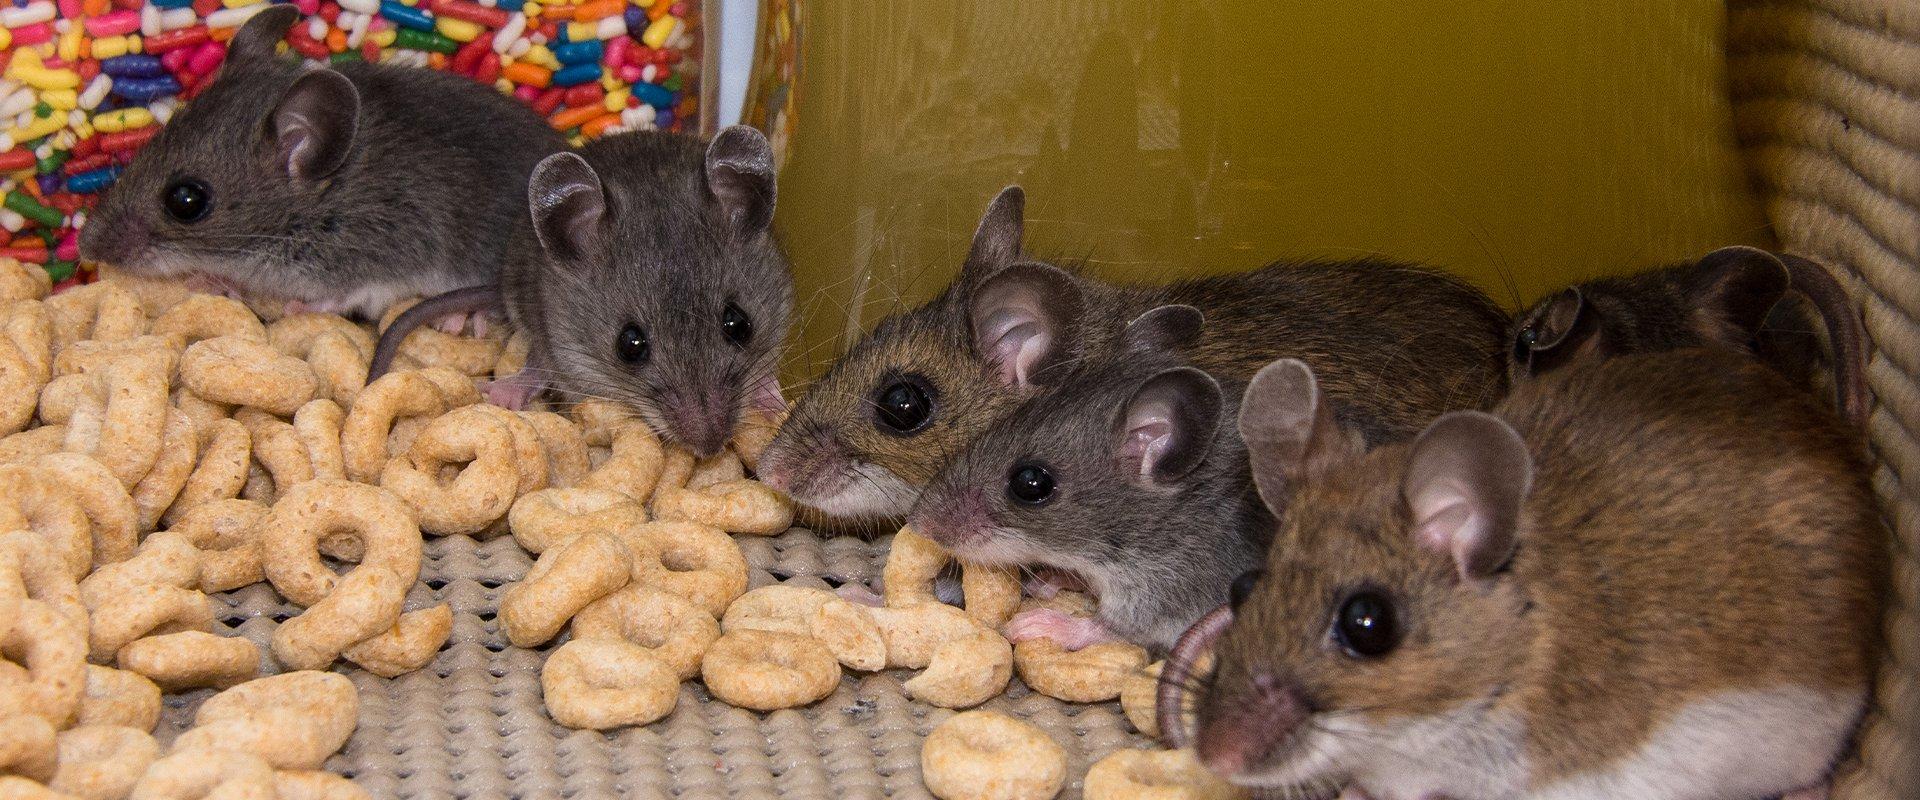 rodents eating cereal